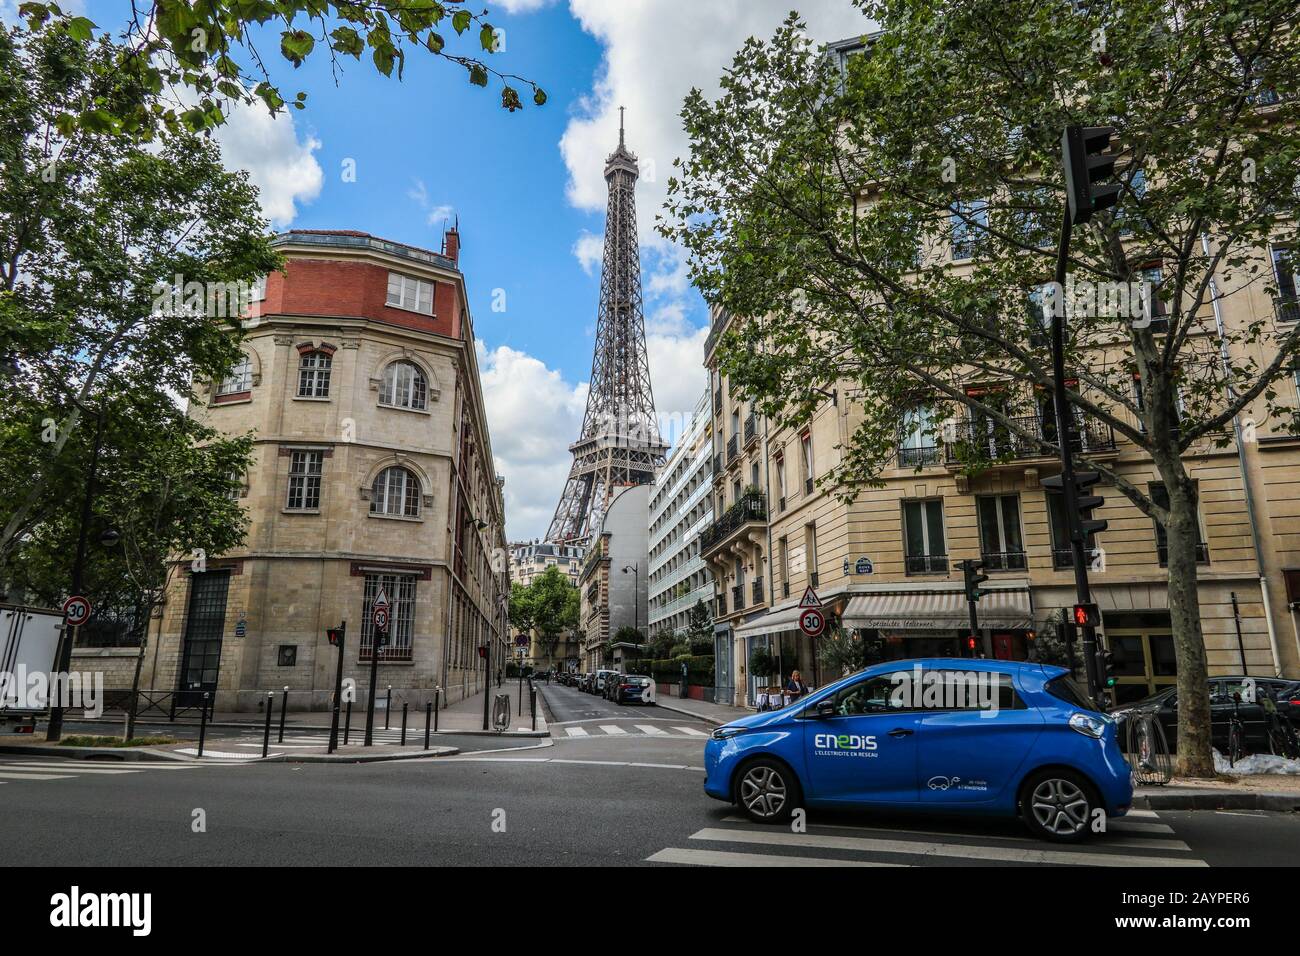 Street scene with Enedis electric car & Eiffel Tower in background Paris, France, Europe Stock Photo